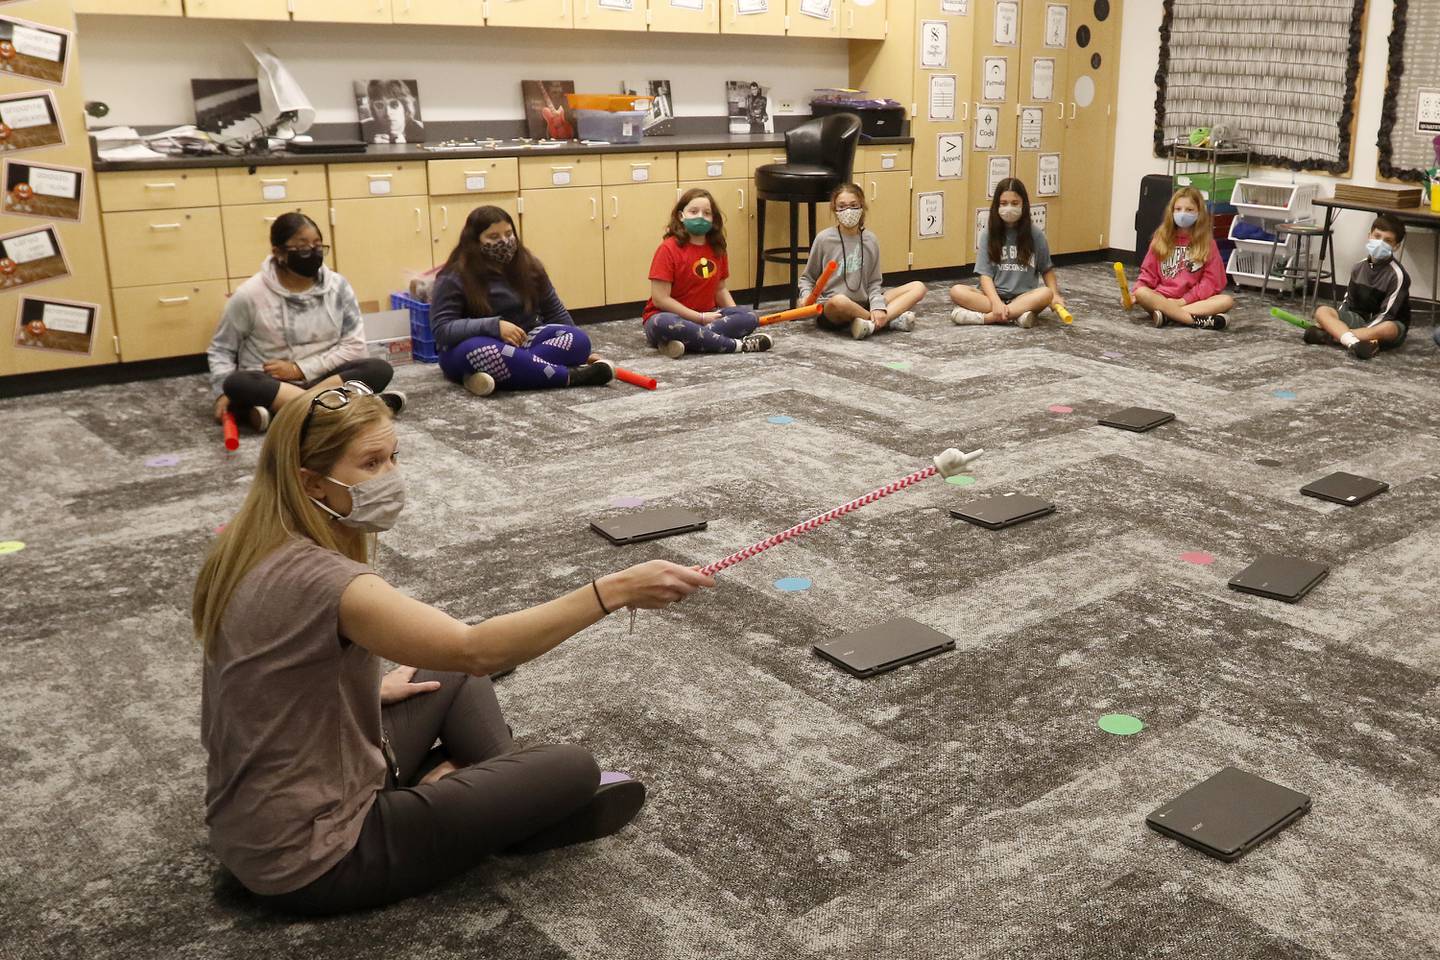 Coventry Elementary School music teacher Kendra Chatham uses a pointer to signal for students, sitting in a socially distant circle around the room, to play their instrument during in-person learning at Coventry Elementary School on Wednesday, Sept. 29, 2021 in Crystal Lake.